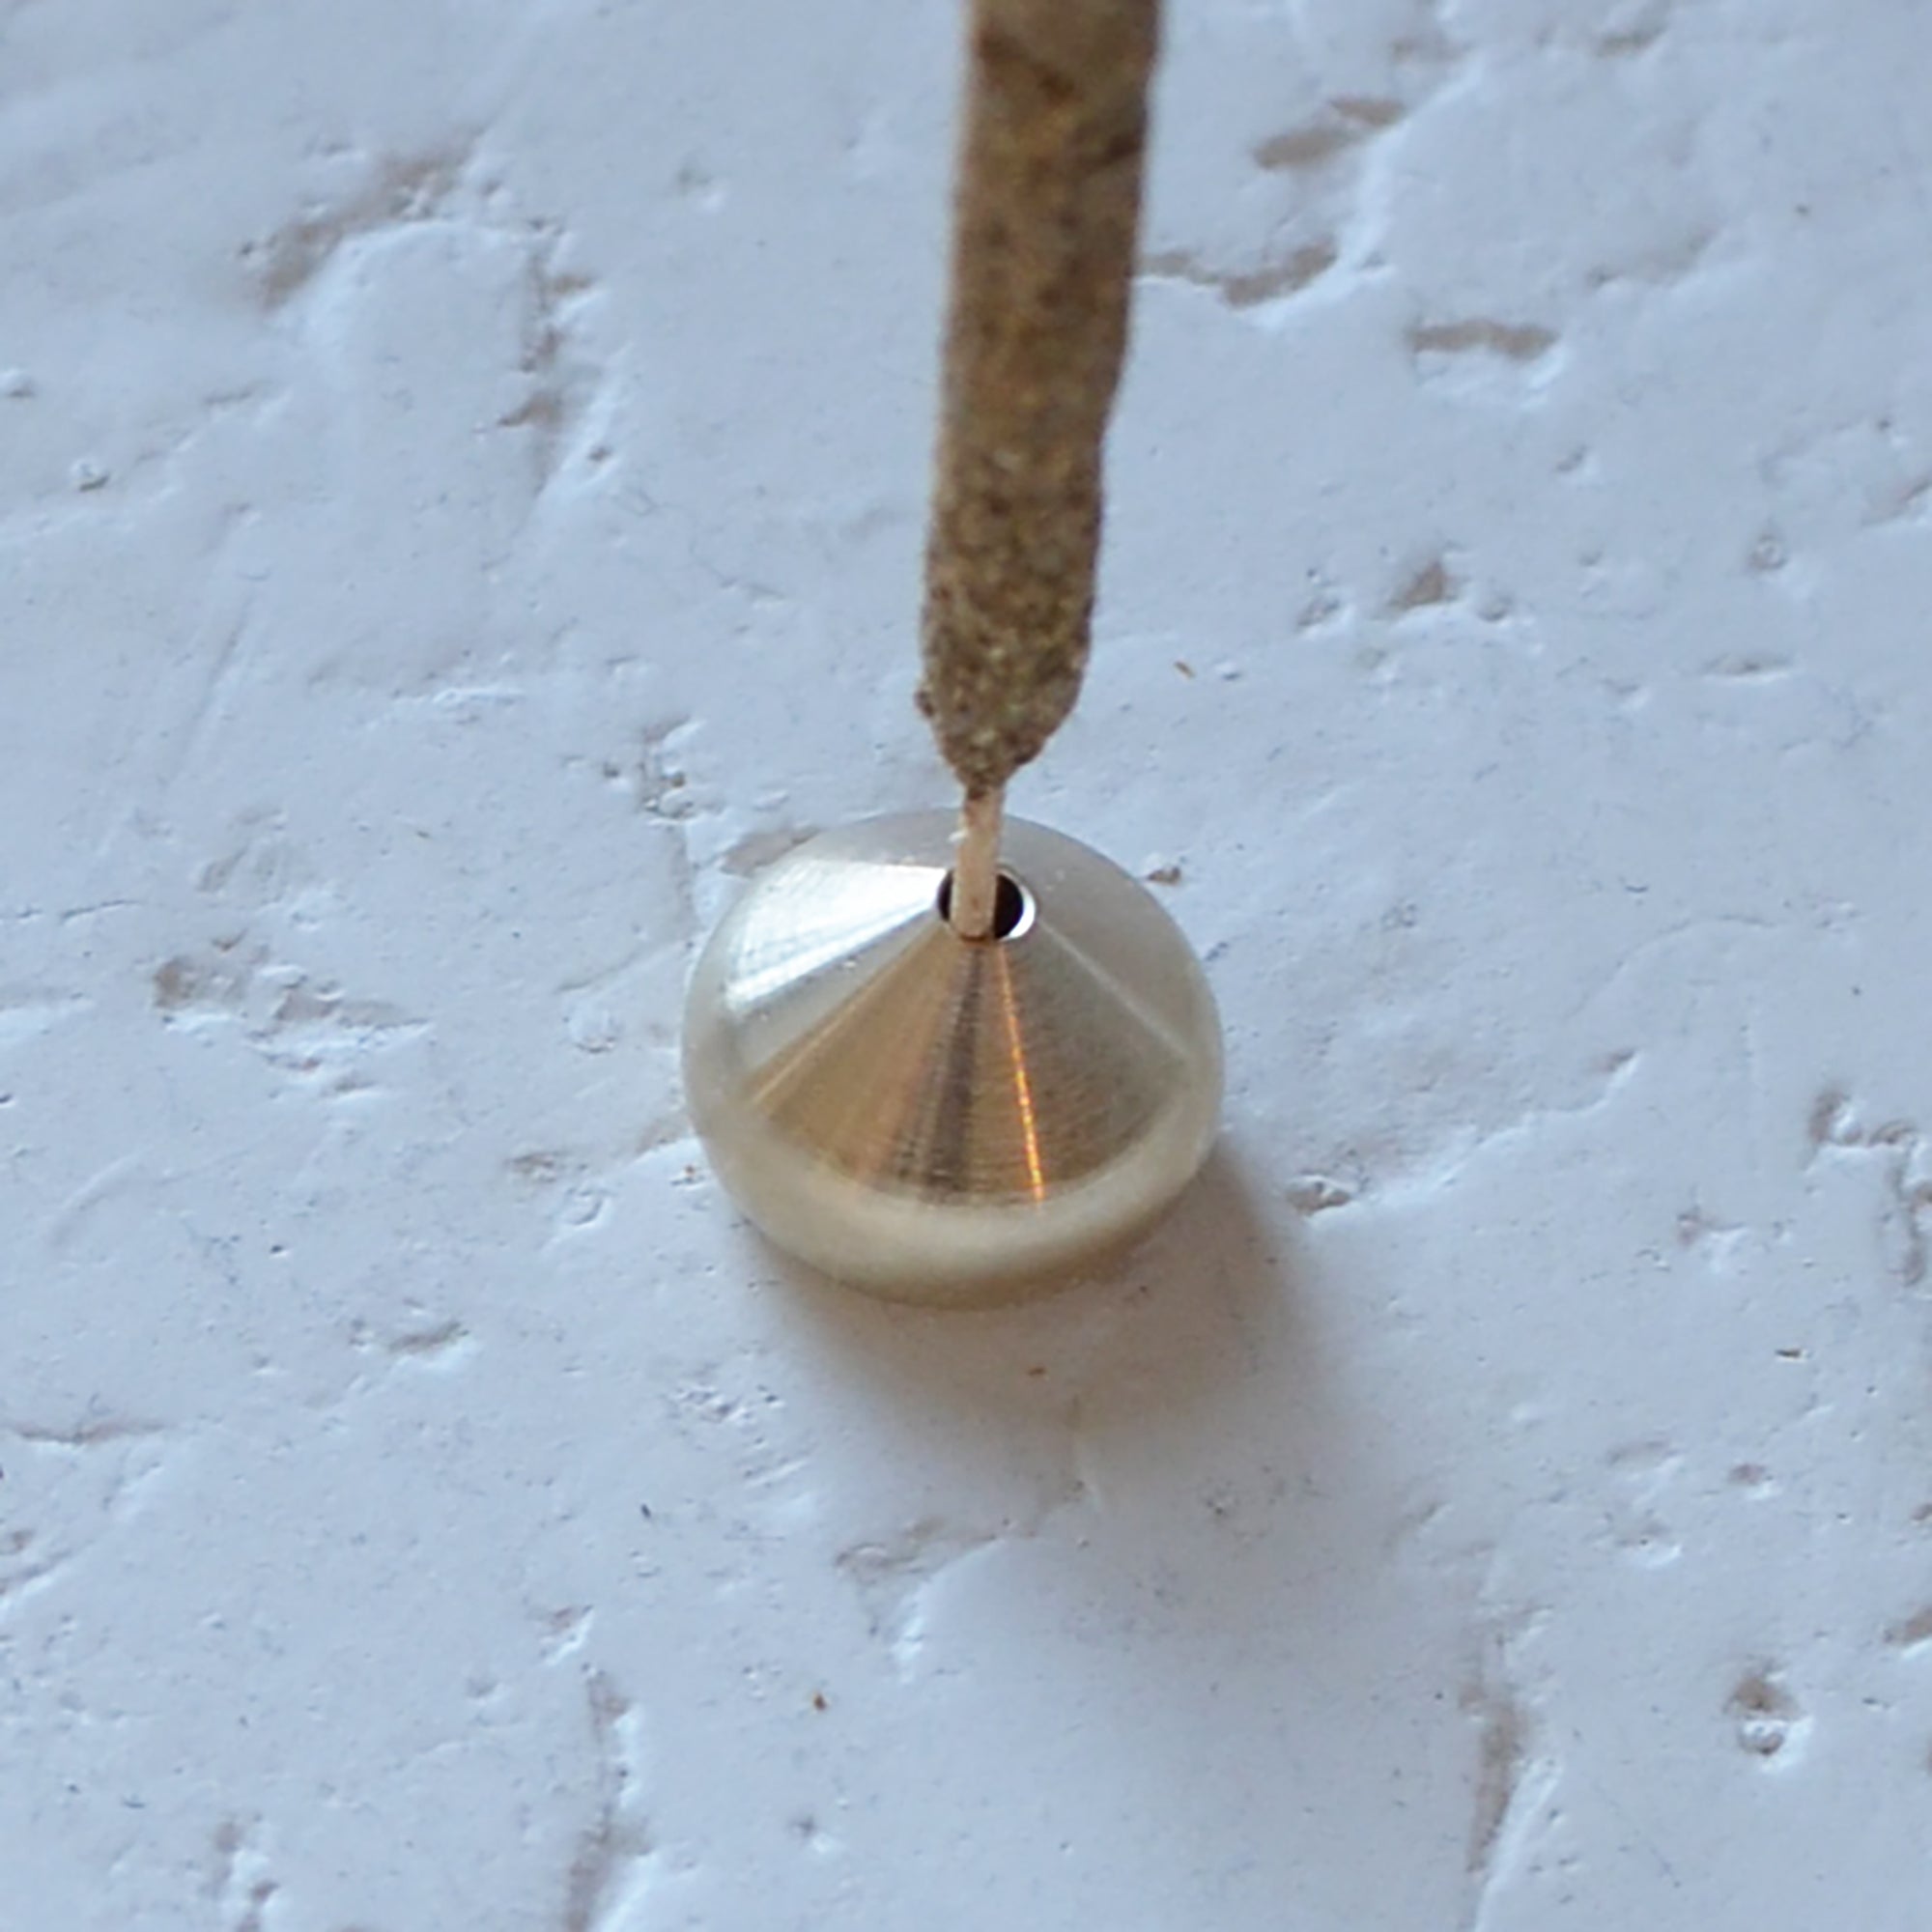 an incense stick with a medium waterdrop incense holder made of brass